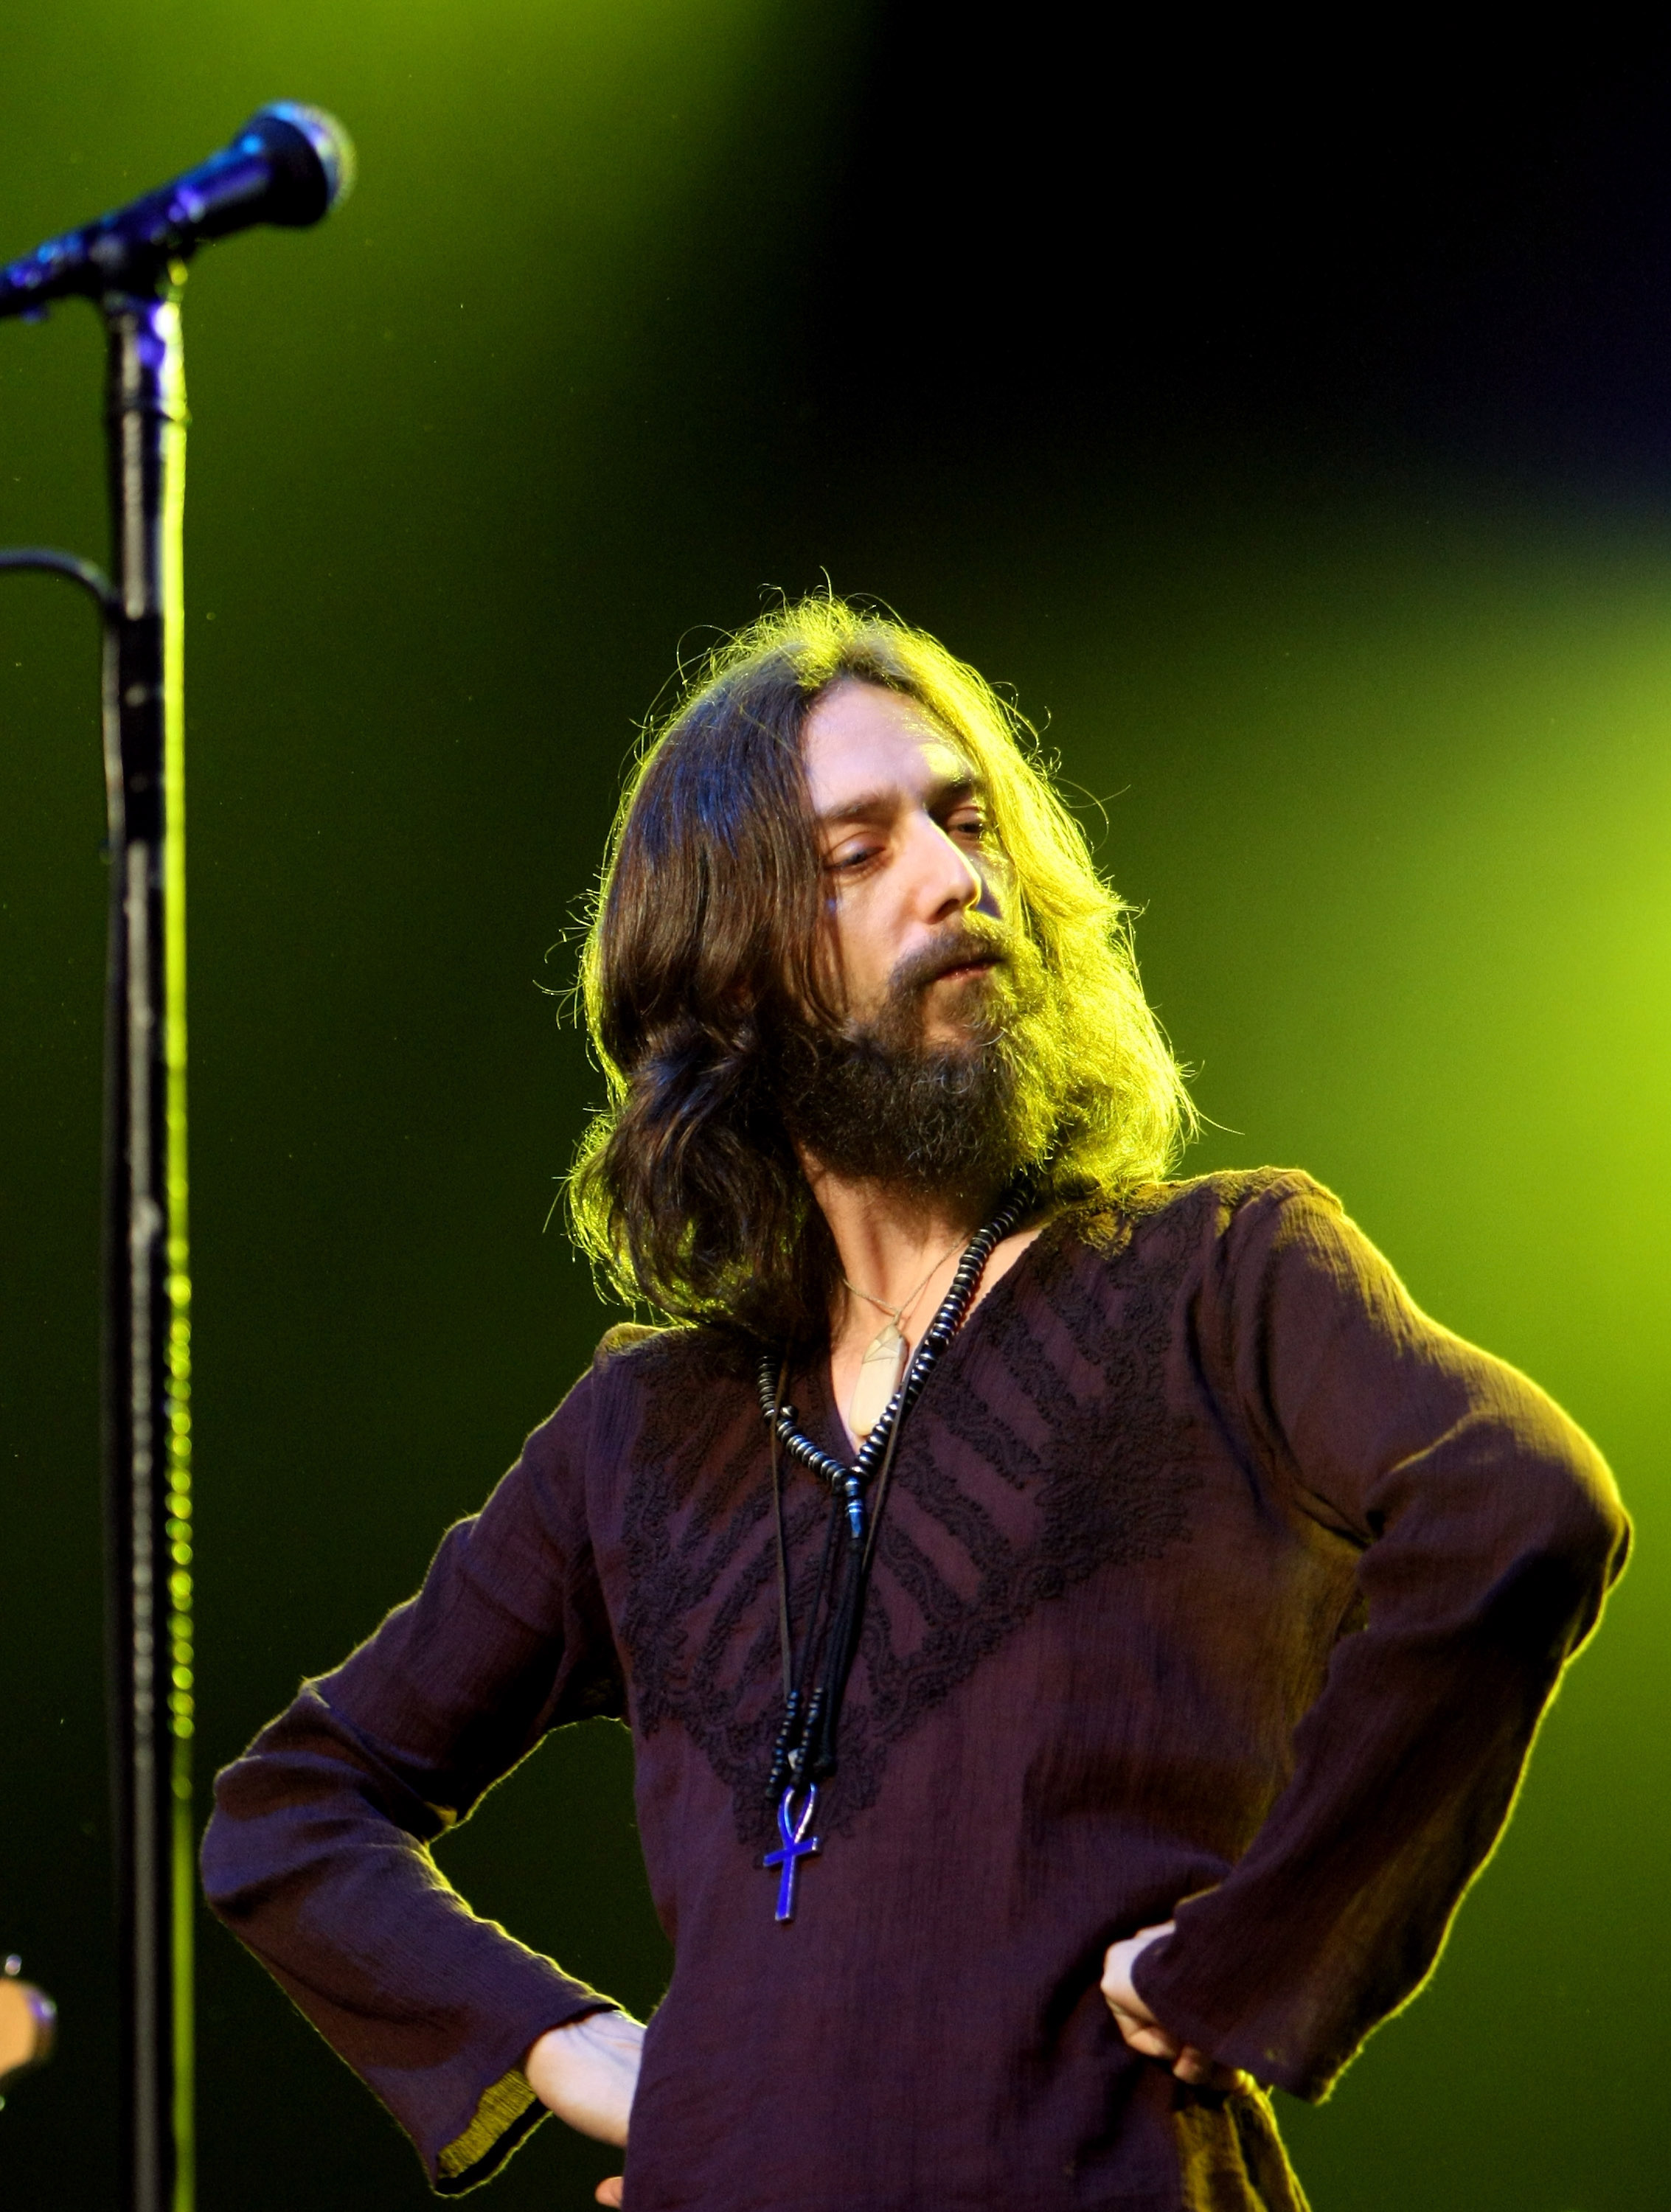 Chris Robinson, Rich Robinson, and Sven Pipien formed the core founding members of the band